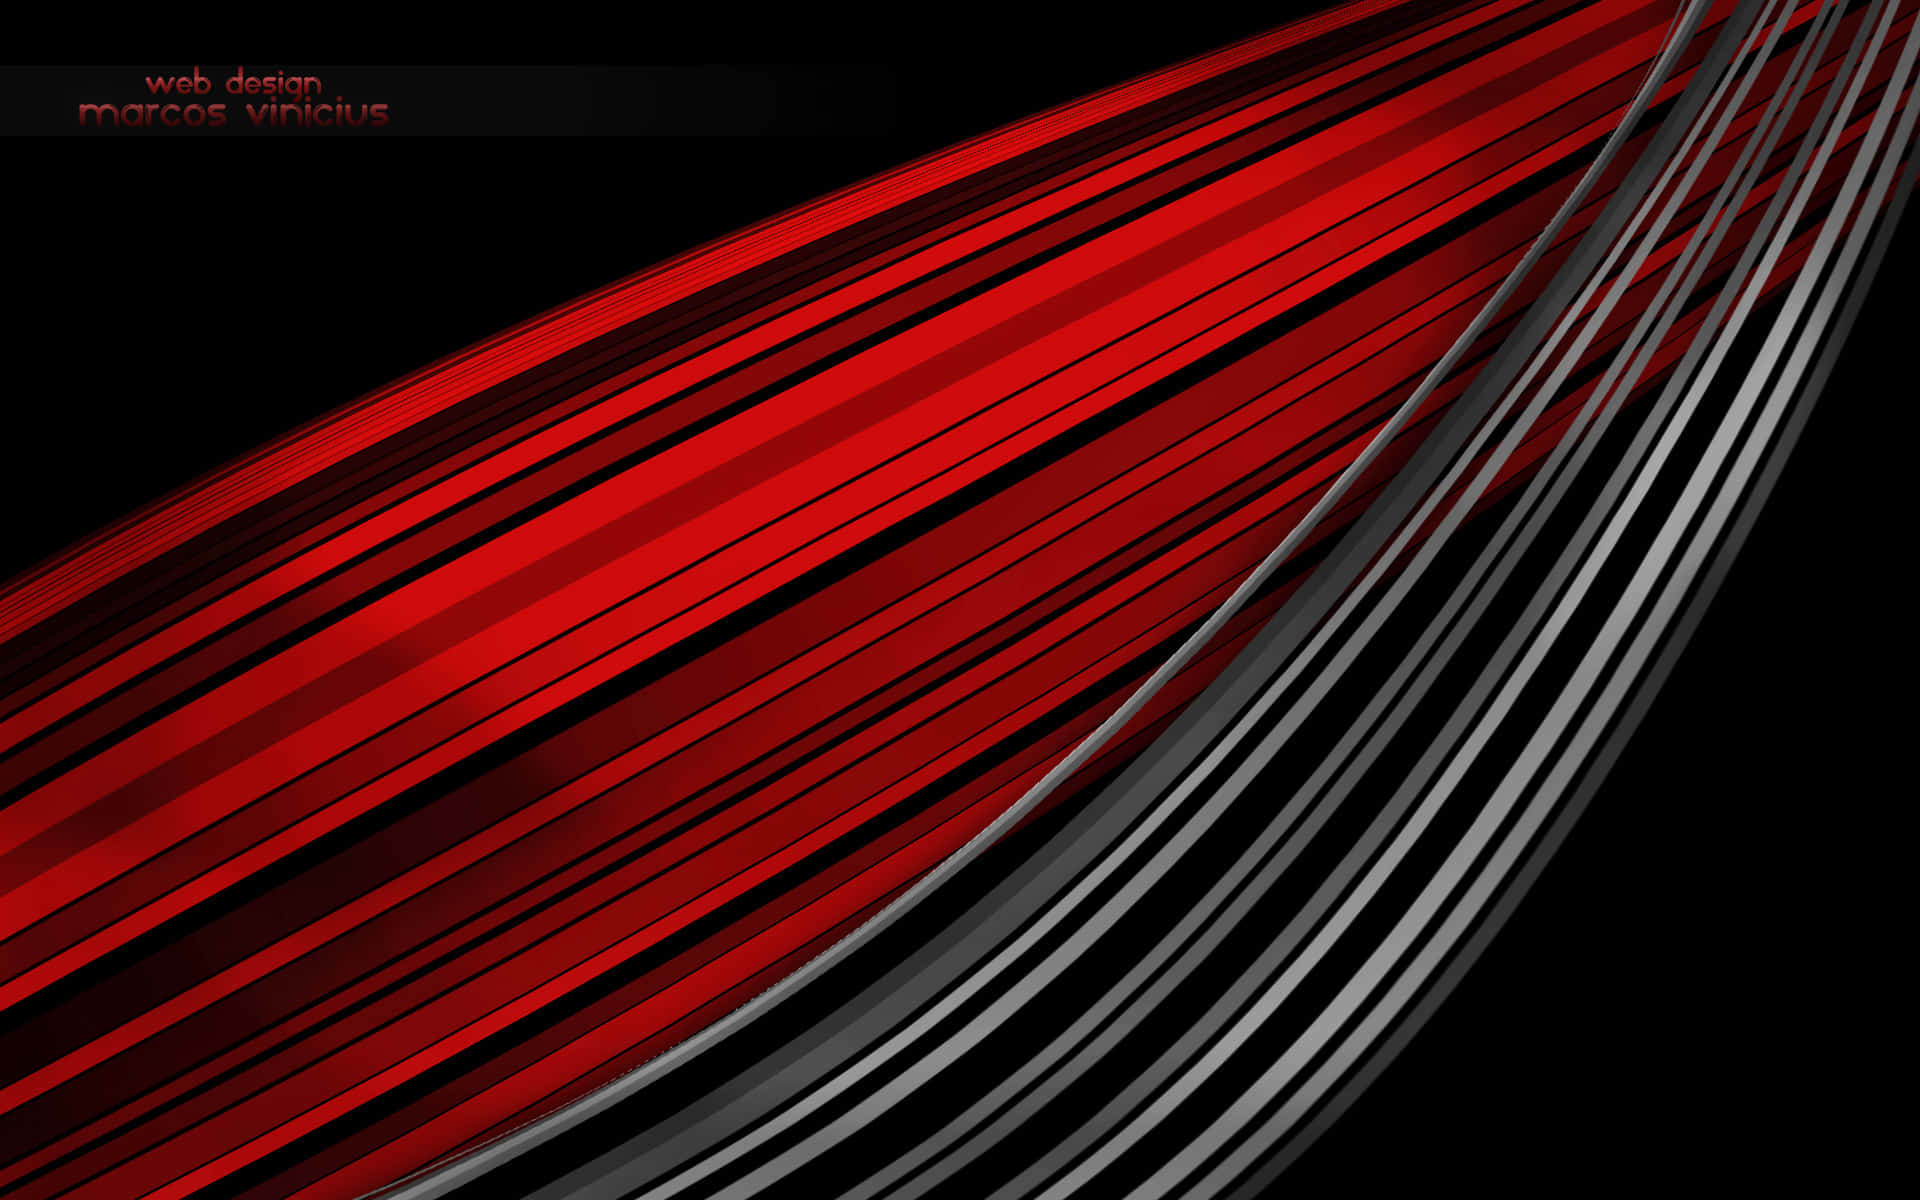 "Abstract Design of Red, White and Black Colors" Wallpaper